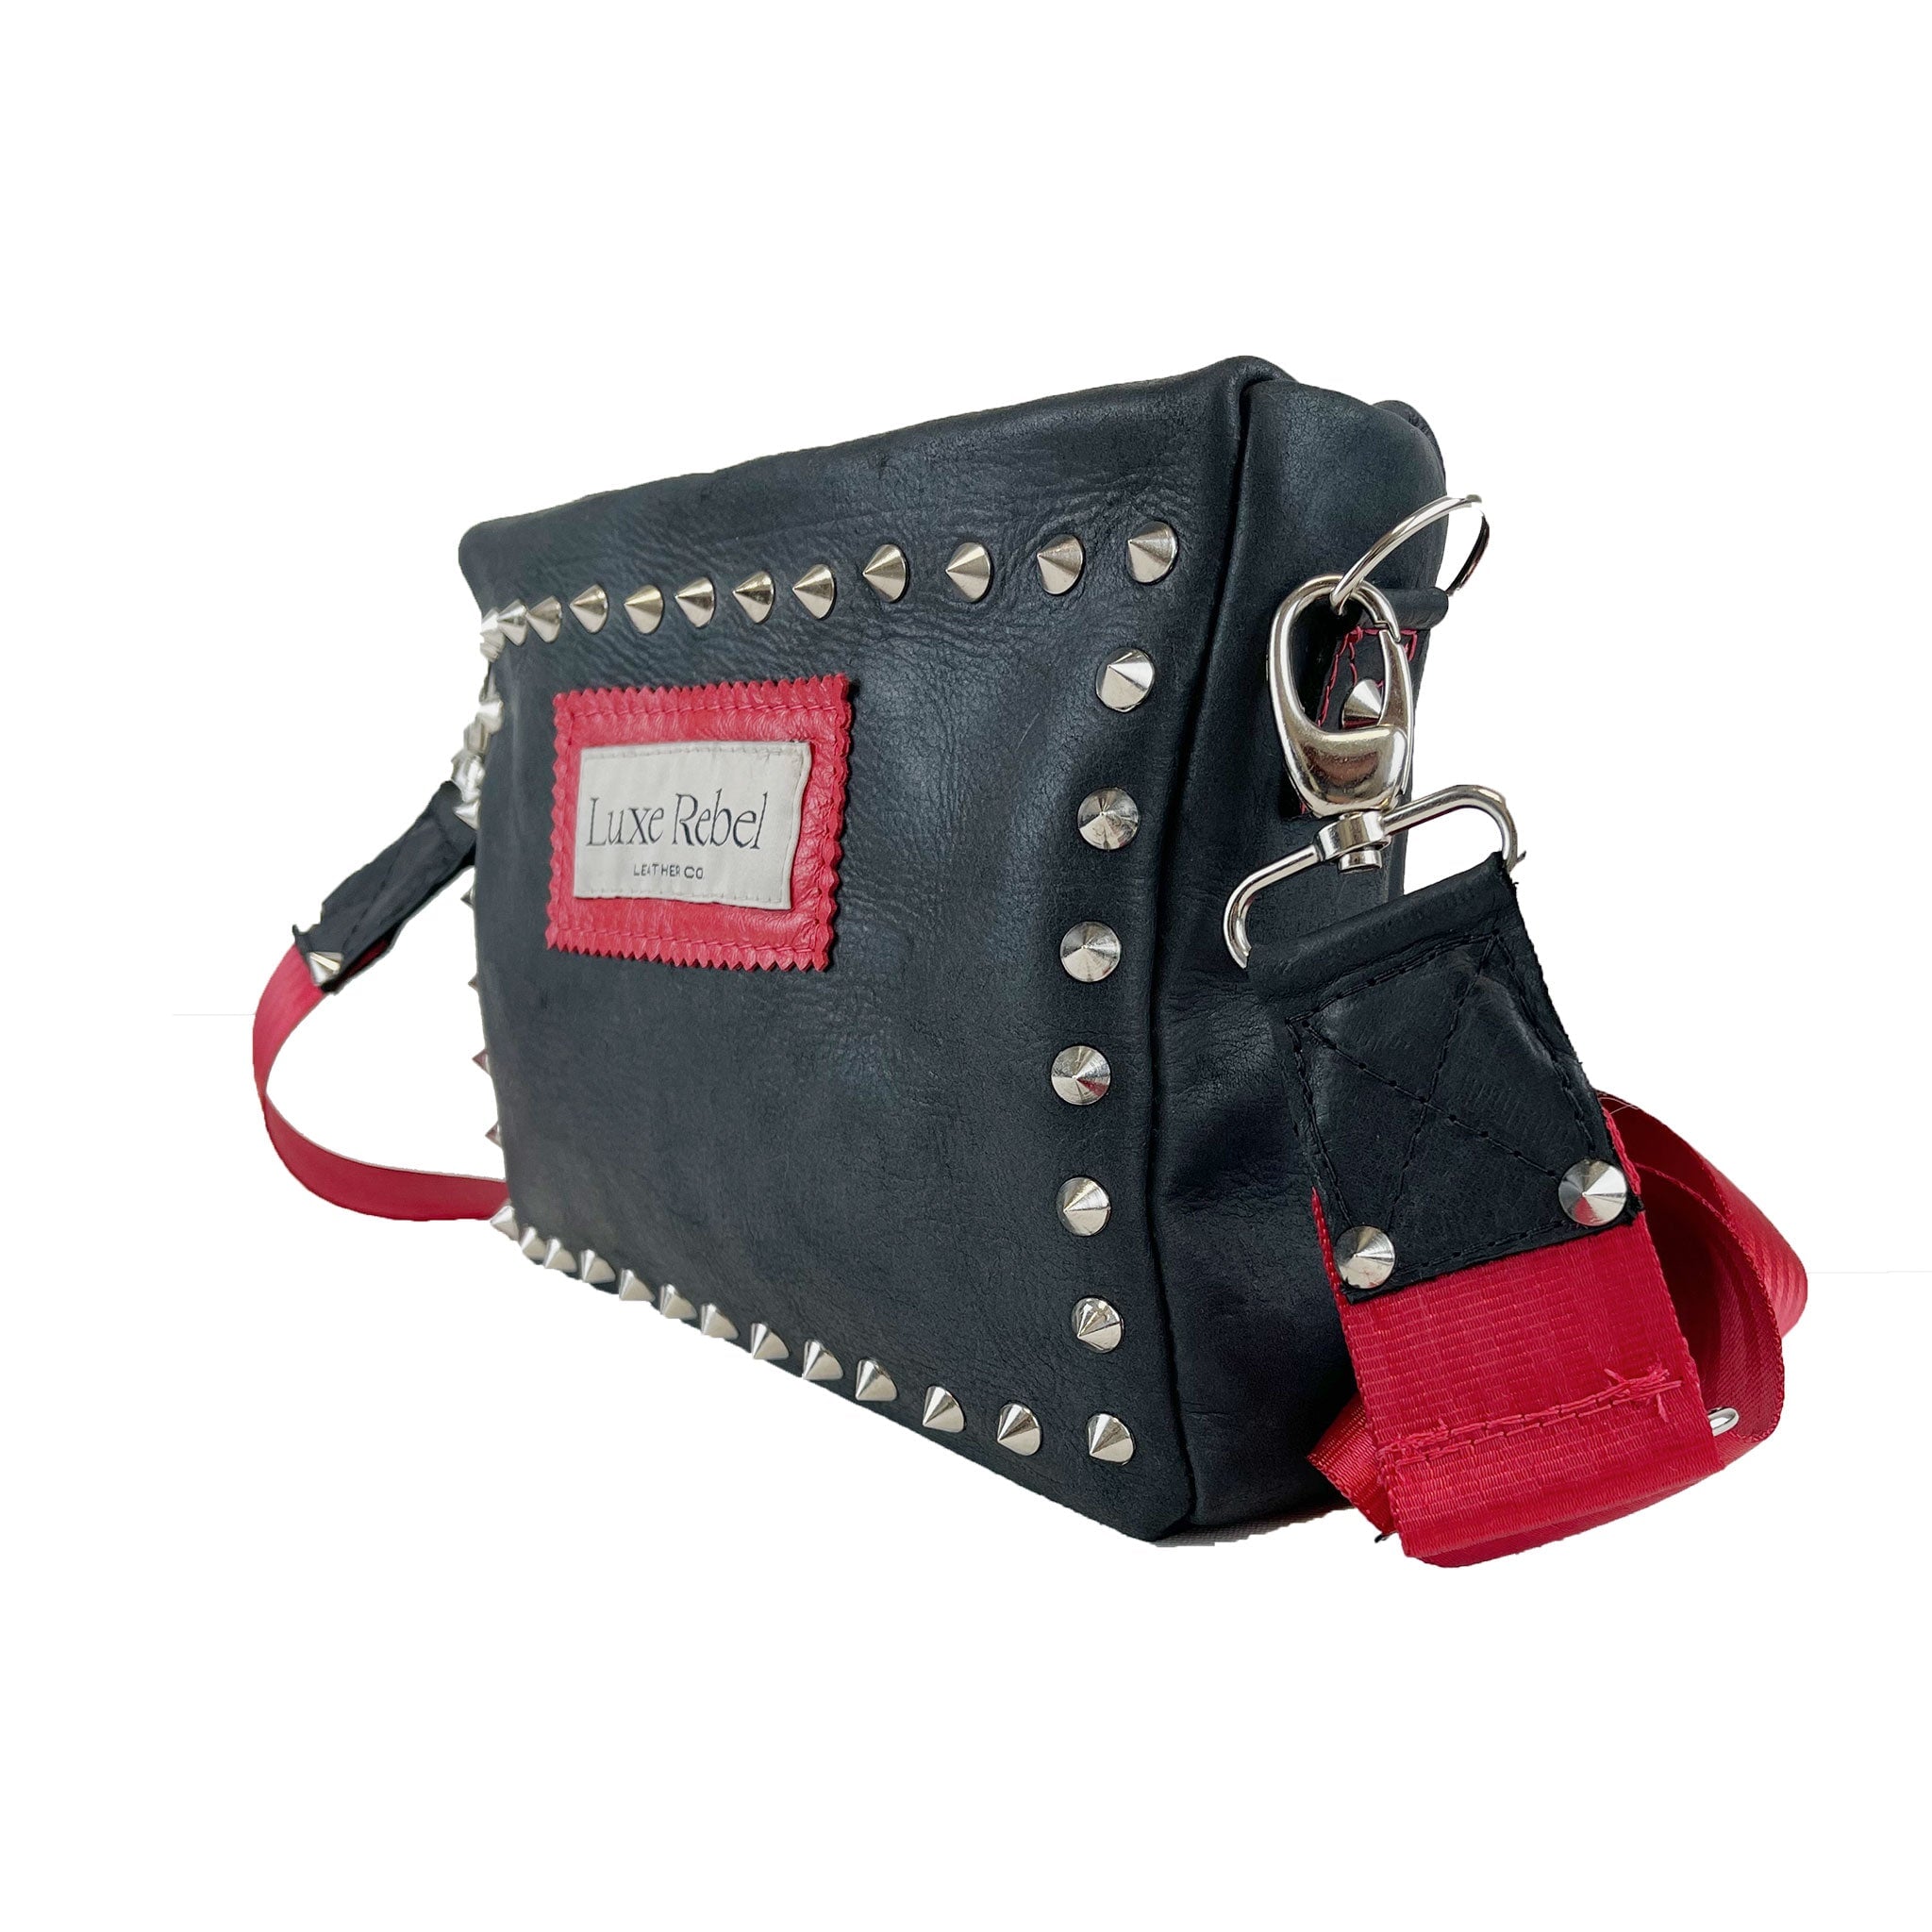 Leather Studded Cross Body Bag – Luxe Rebel Leather Co